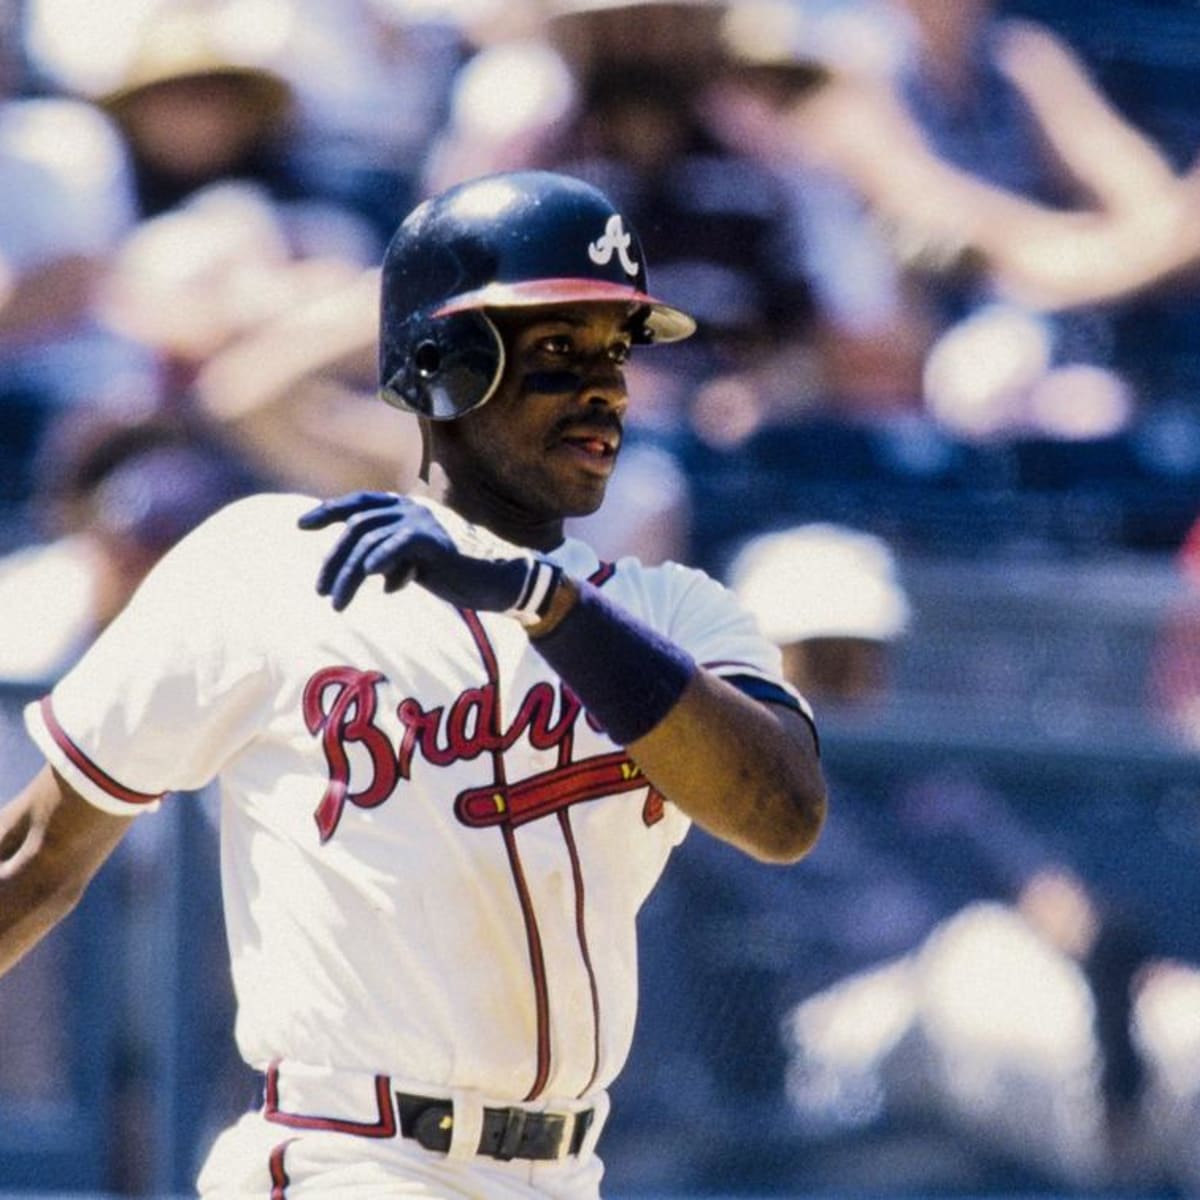 Blue Jays', Braves' Great Fred McGriff Belongs in Baseball's Hall of Fame -  Fastball